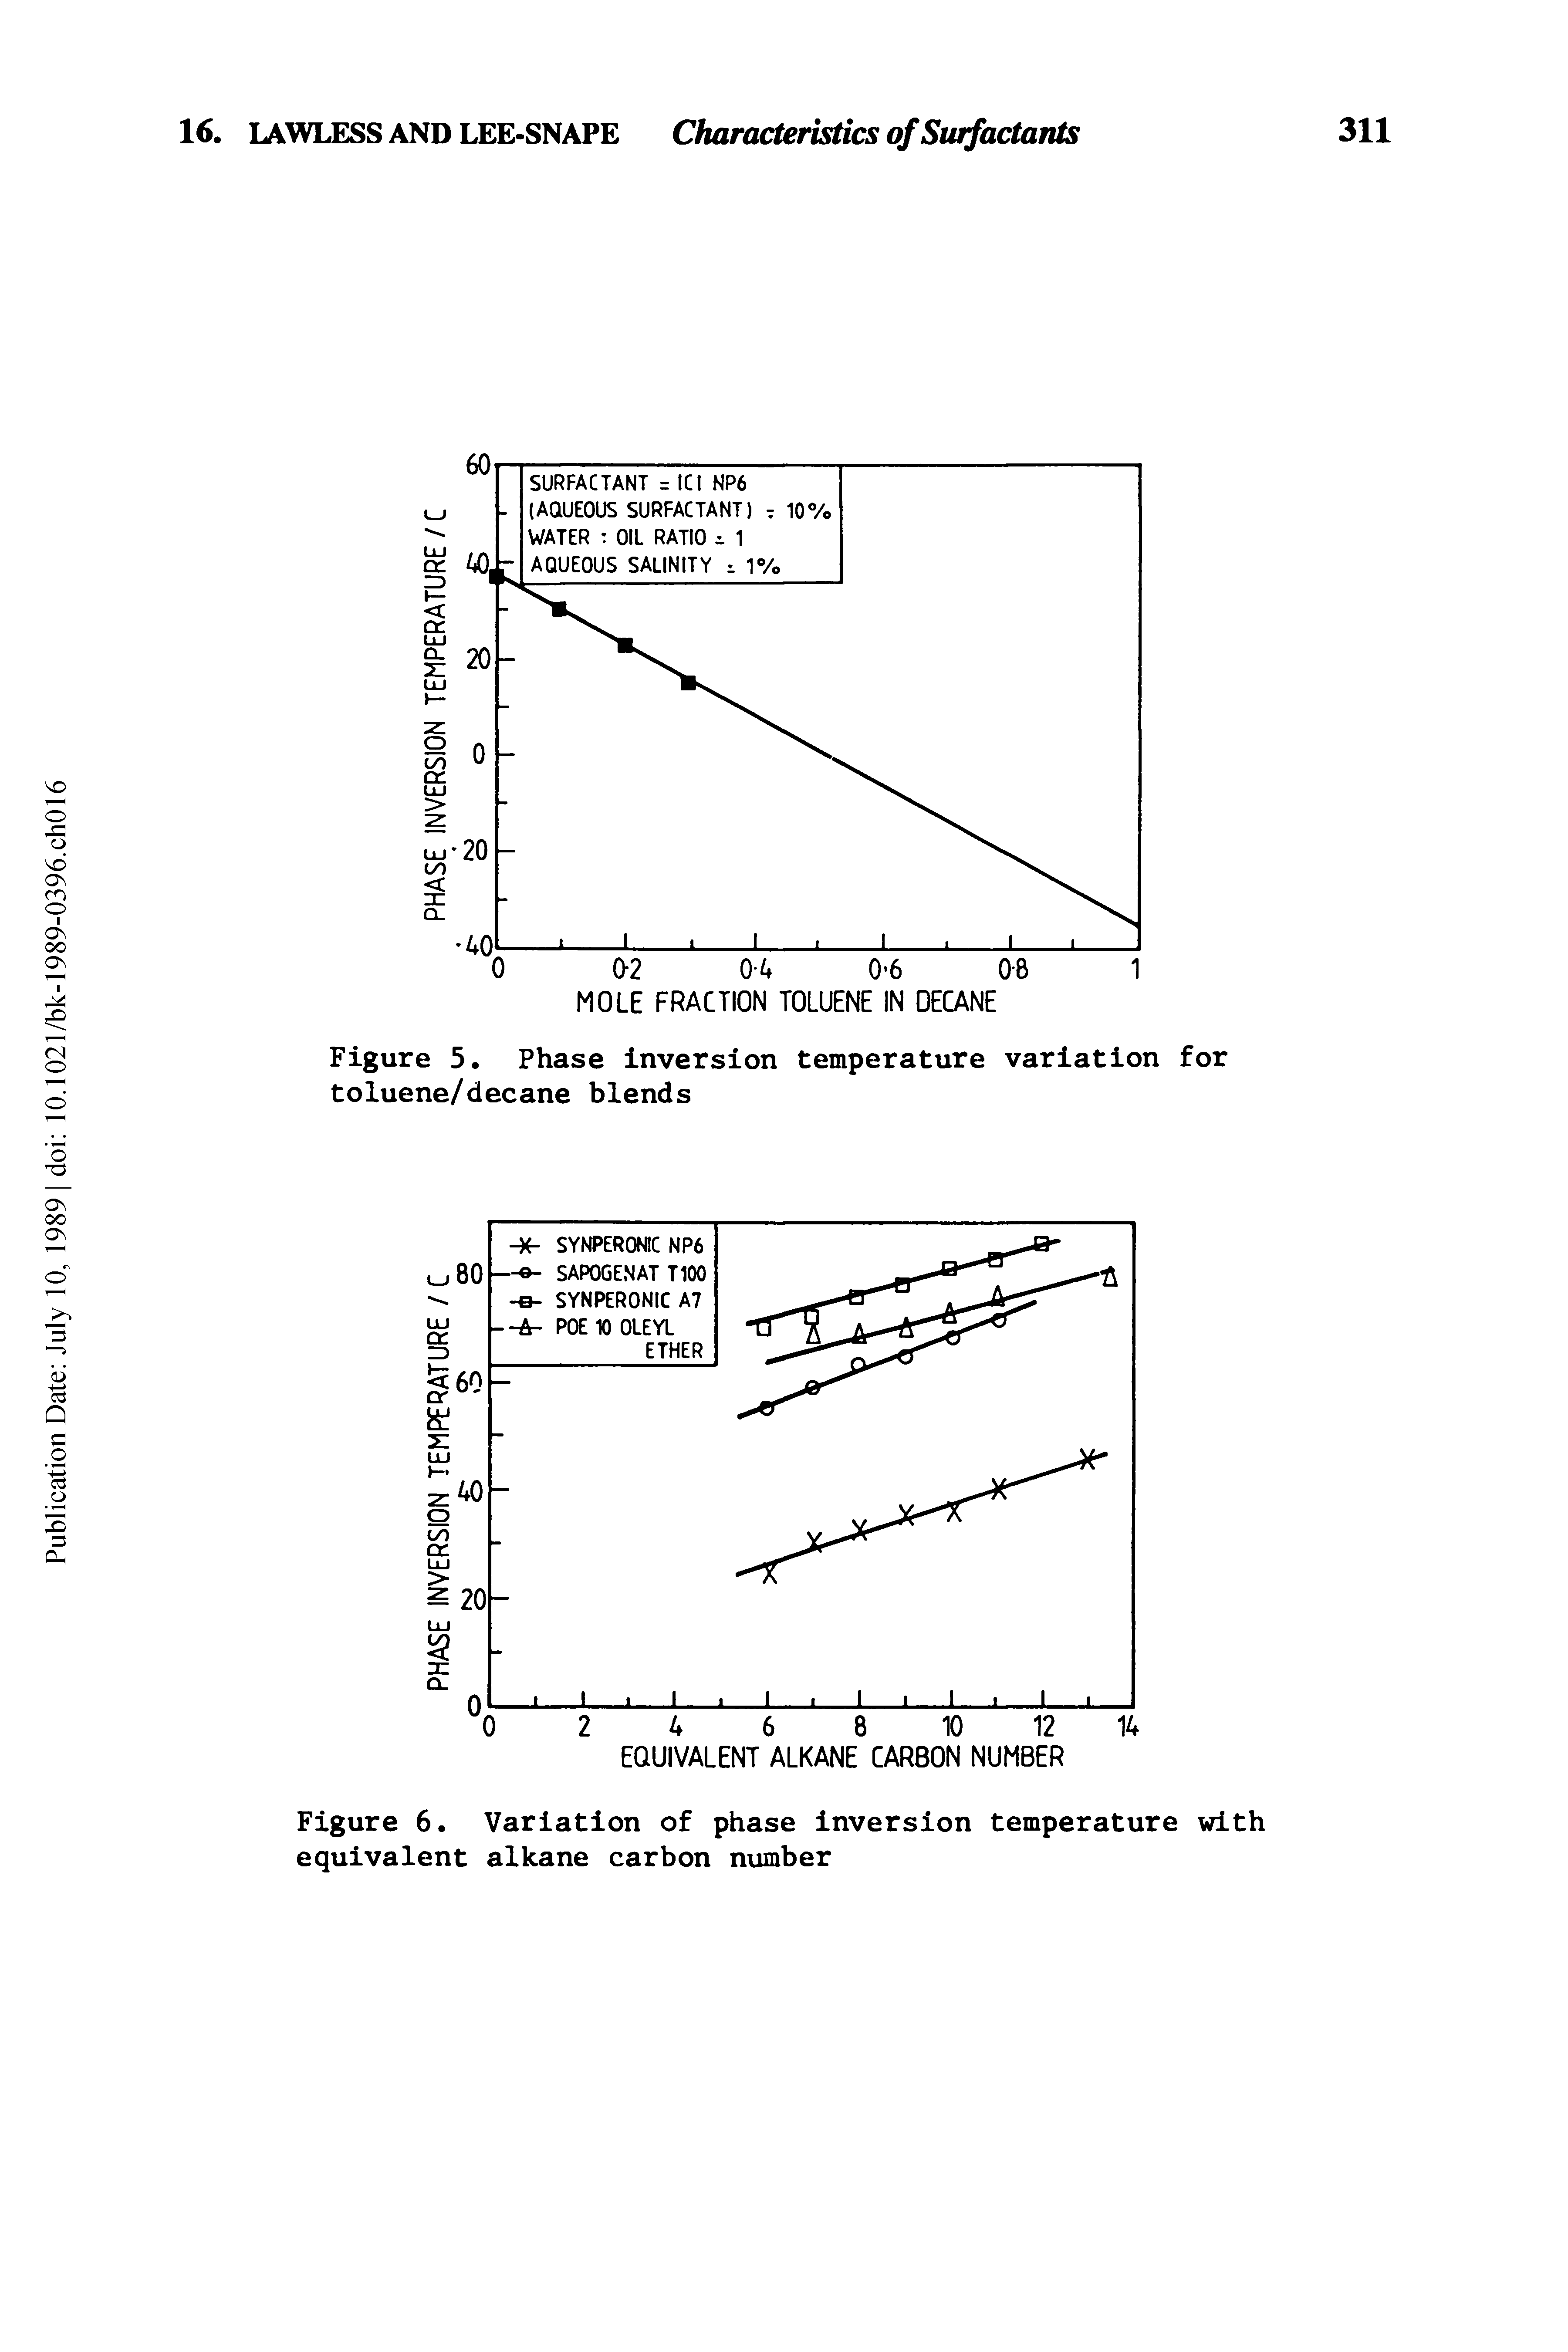 Figure 6. Variation of phase inversion temperature with equivalent alkane carbon number...